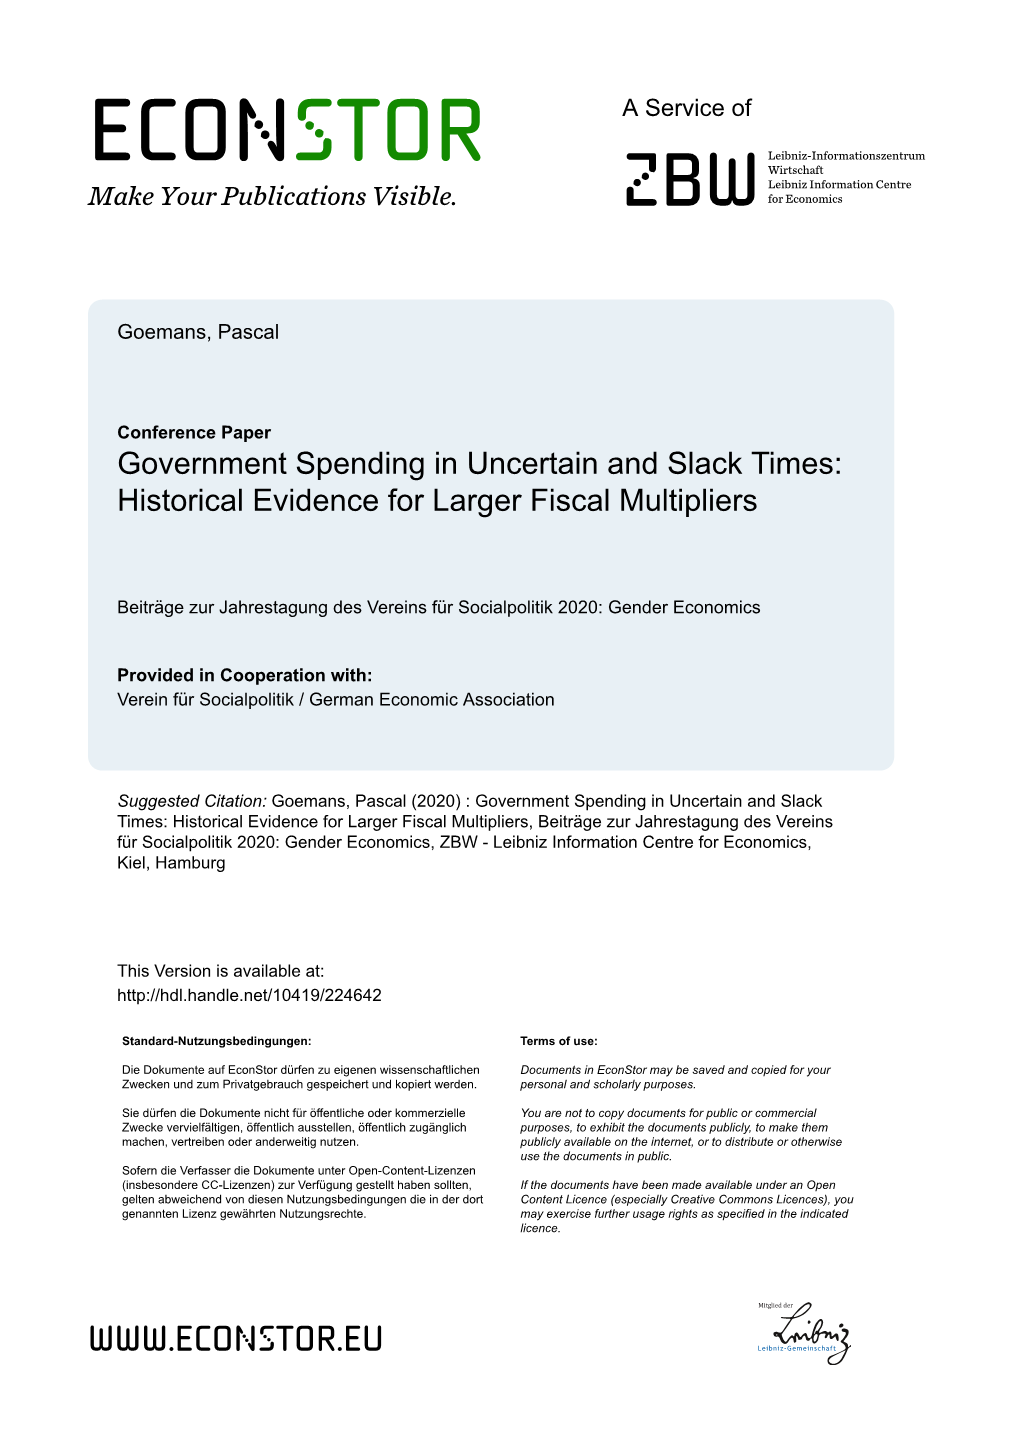 Government Spending in Uncertain and Slack Times: Historical Evidence for Larger Fiscal Multipliers